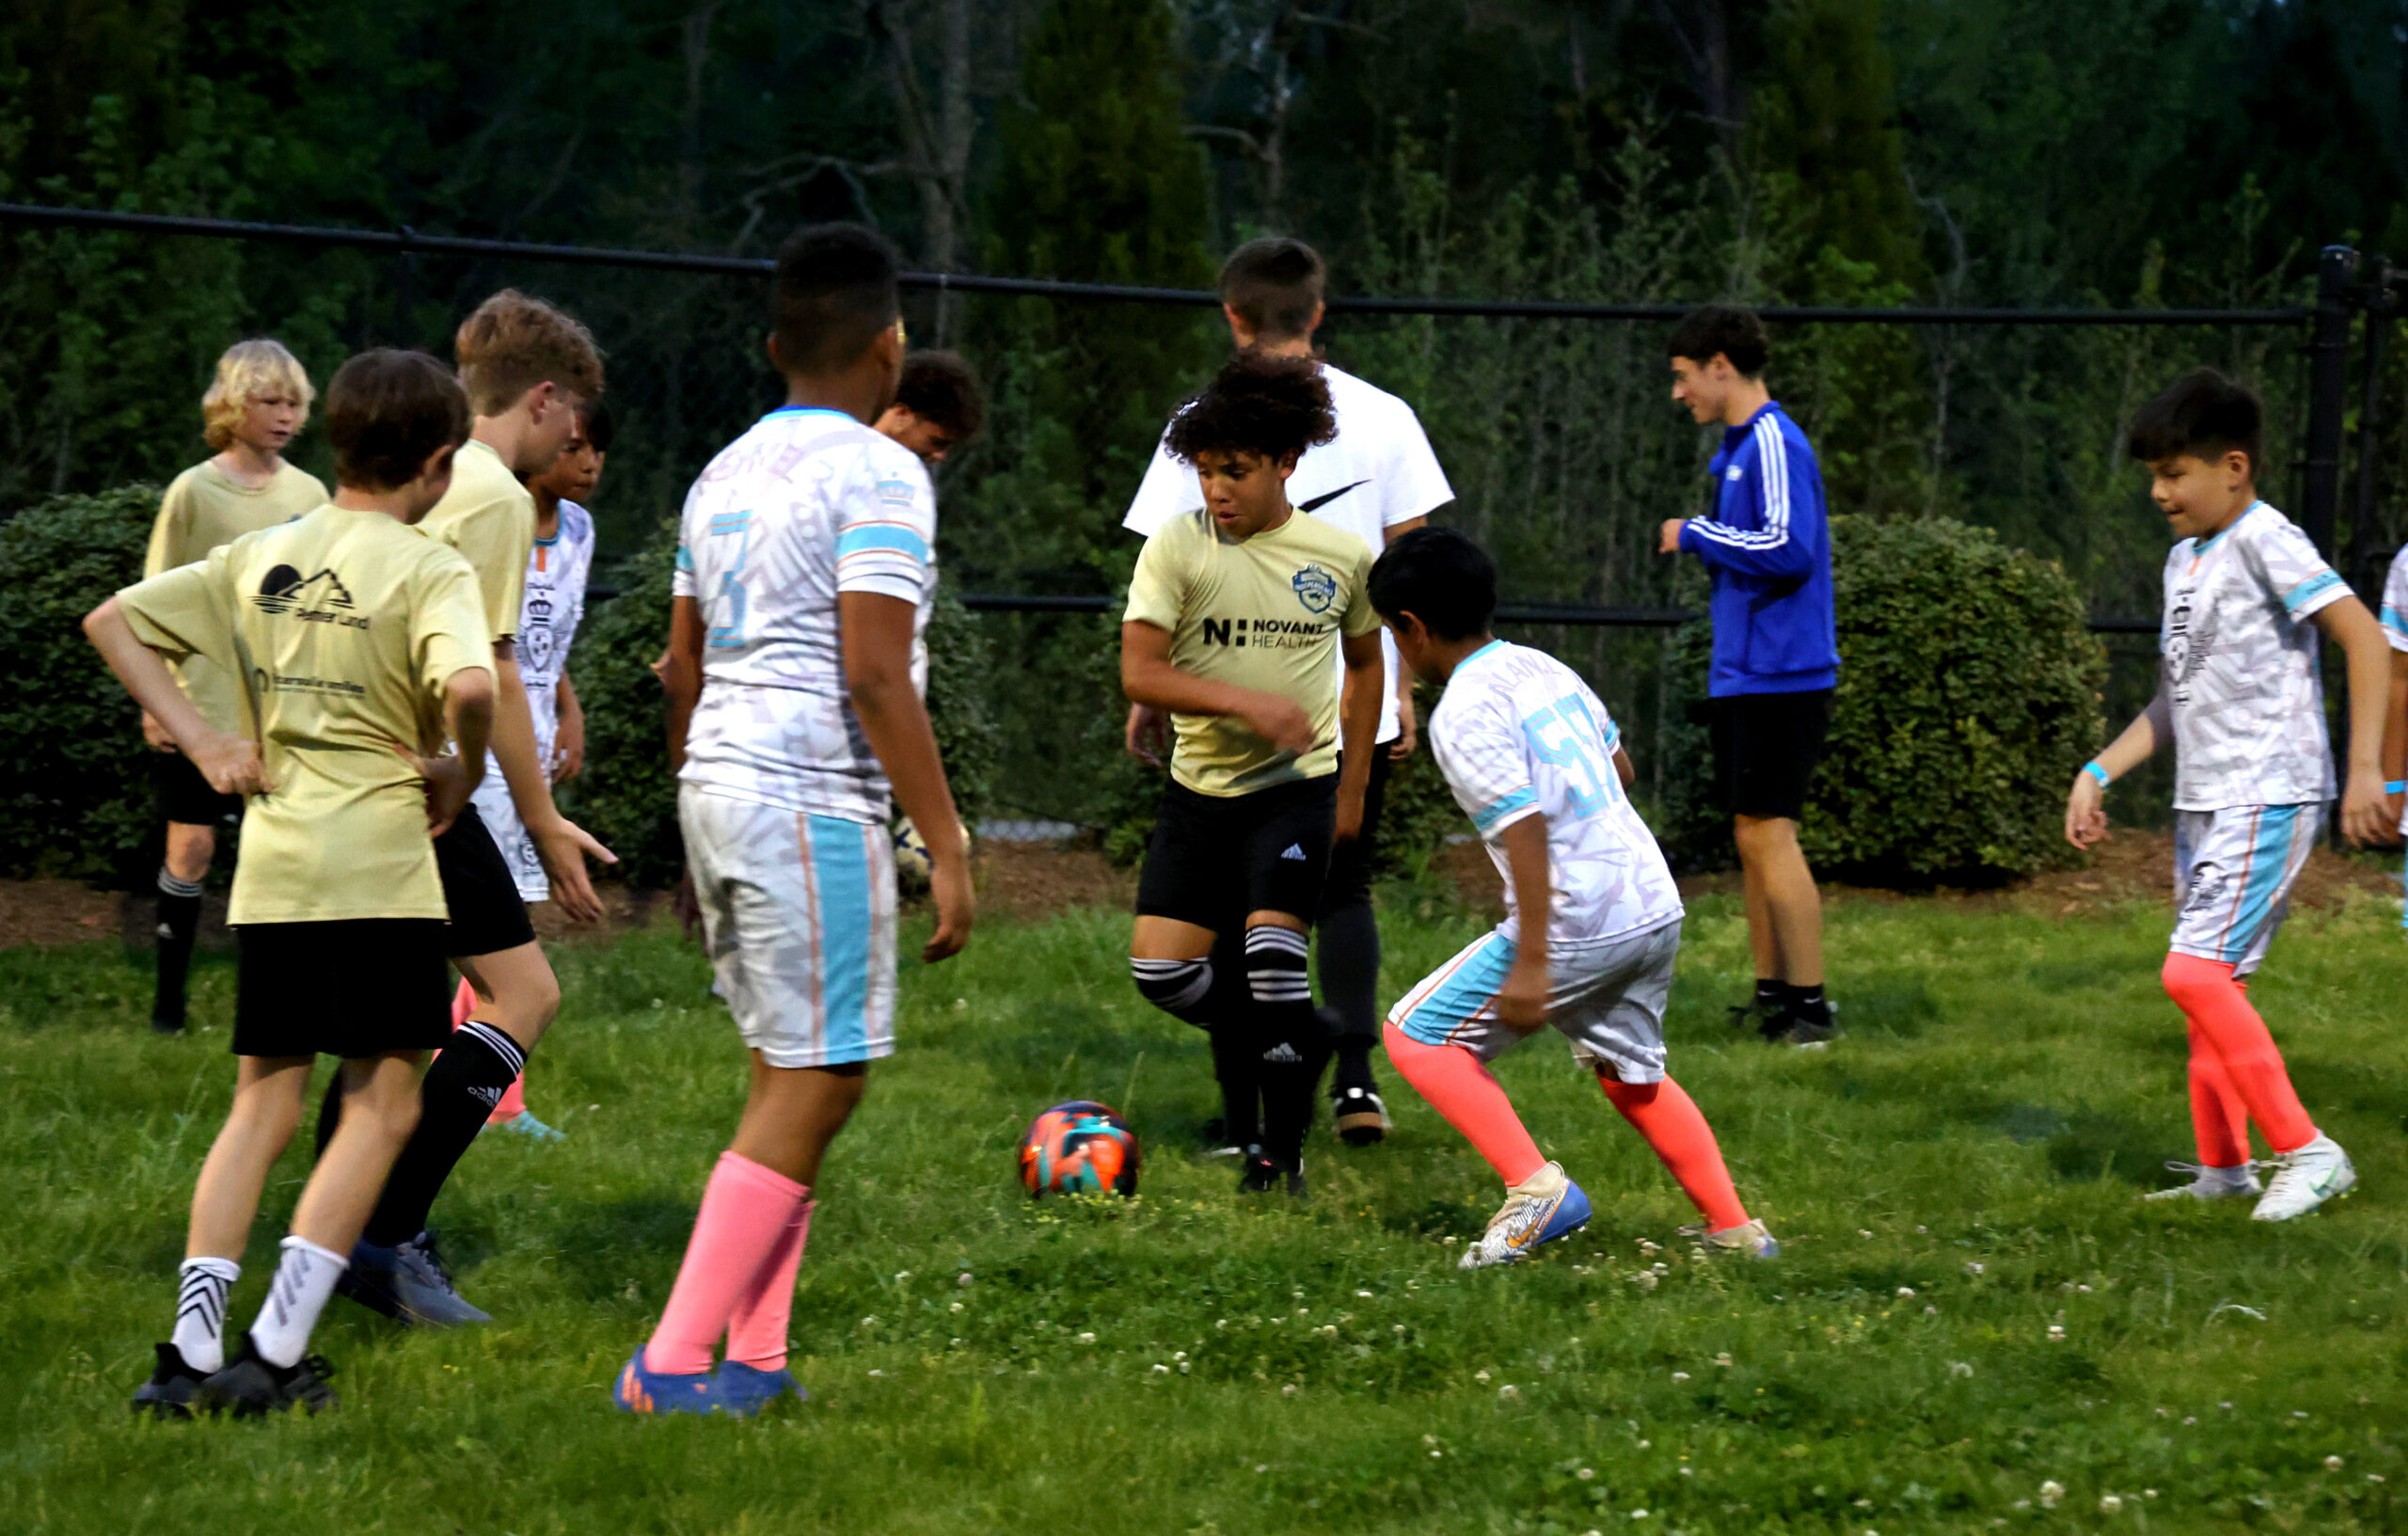 Youth sport organizations including soccer leagues can improve